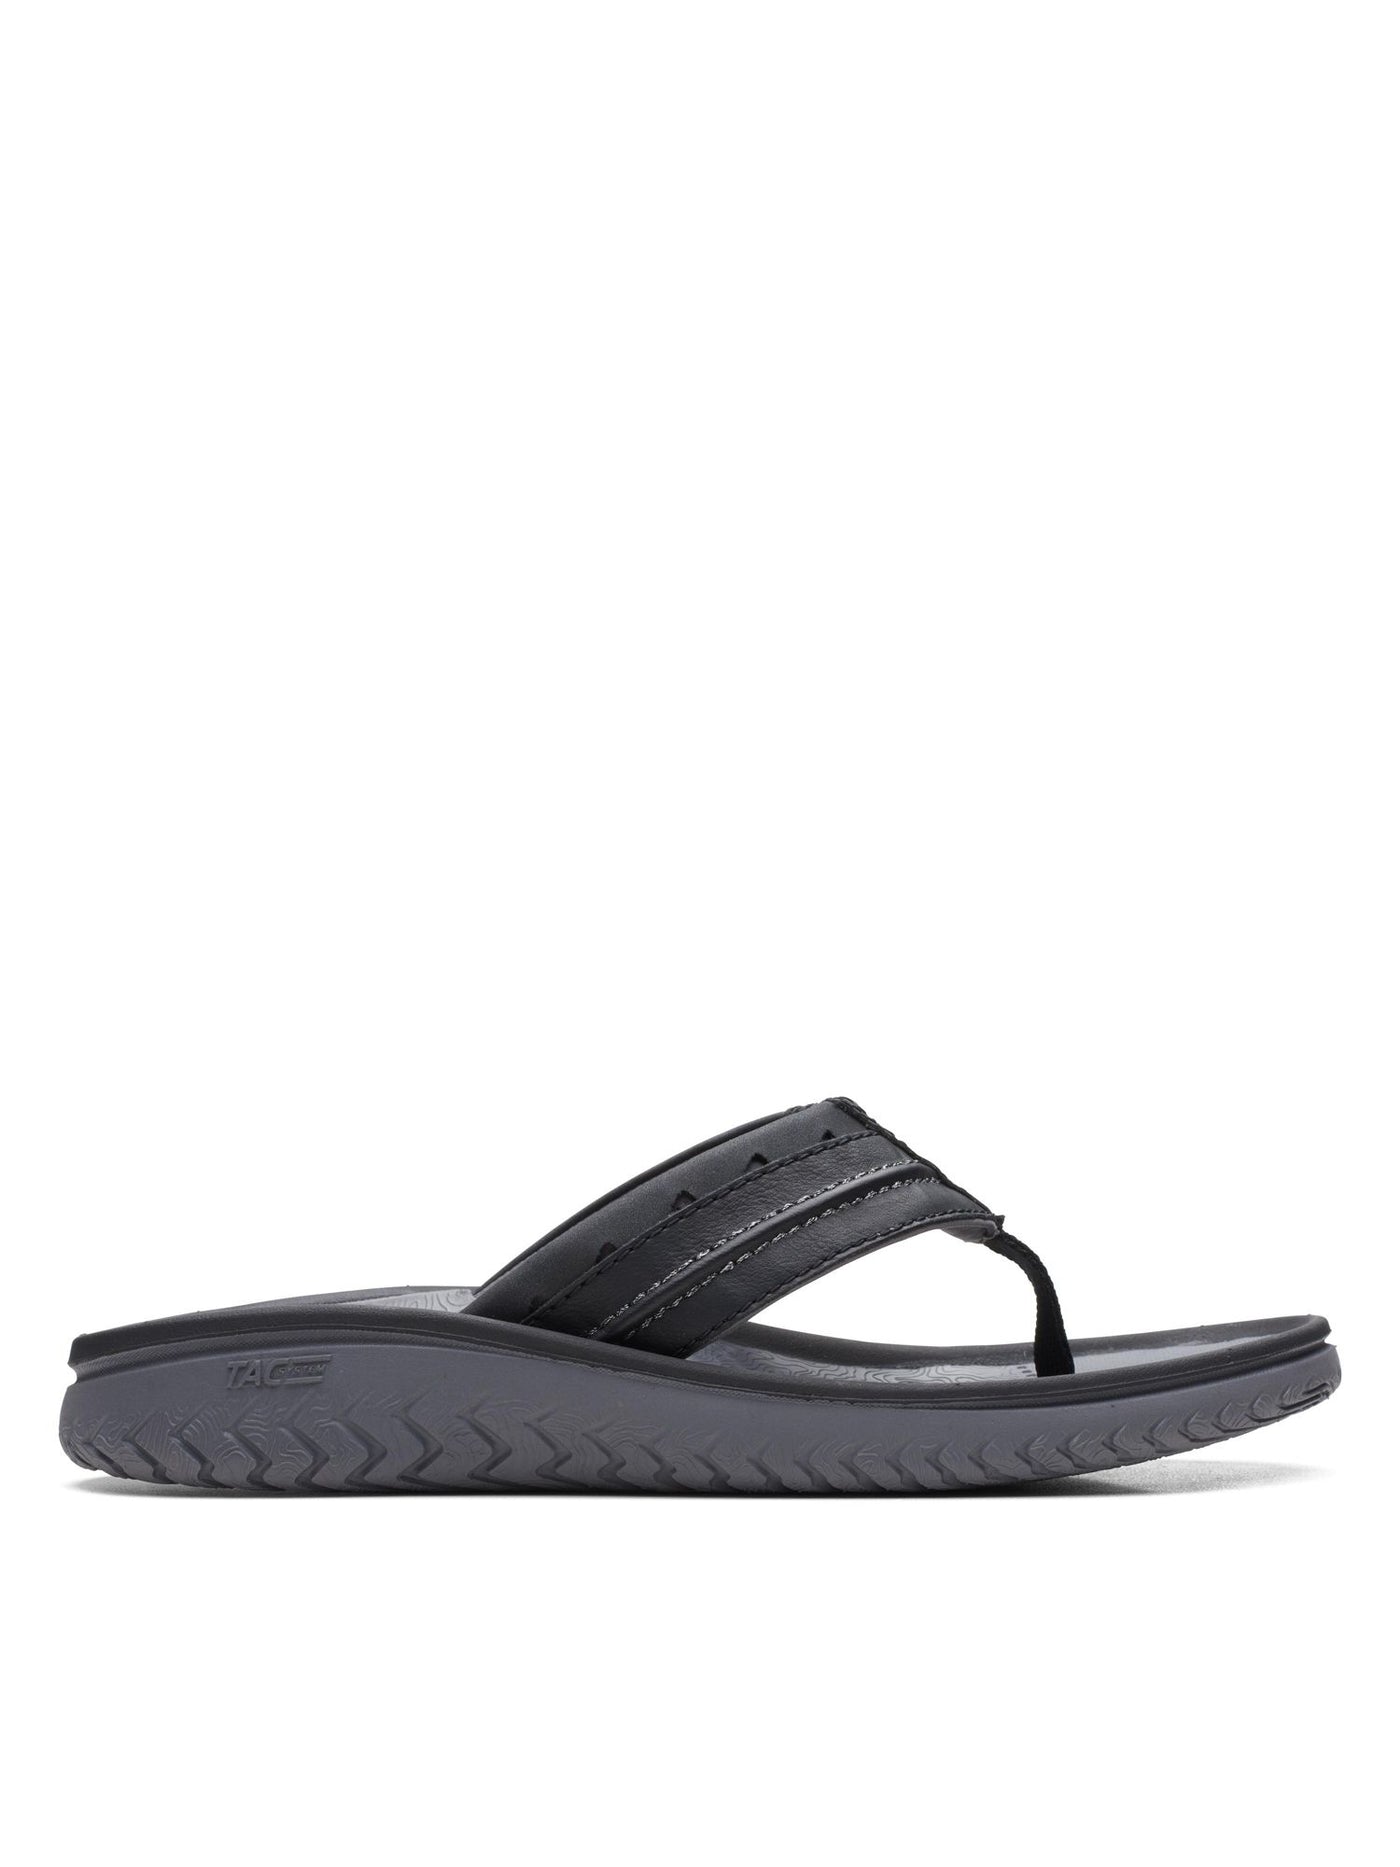 CLARKS COLLECTION Mens Black Trail-Inspired Treading Arch Support Lightweight Wesley Open Toe Slip On Thong Sandals Shoes 12 M